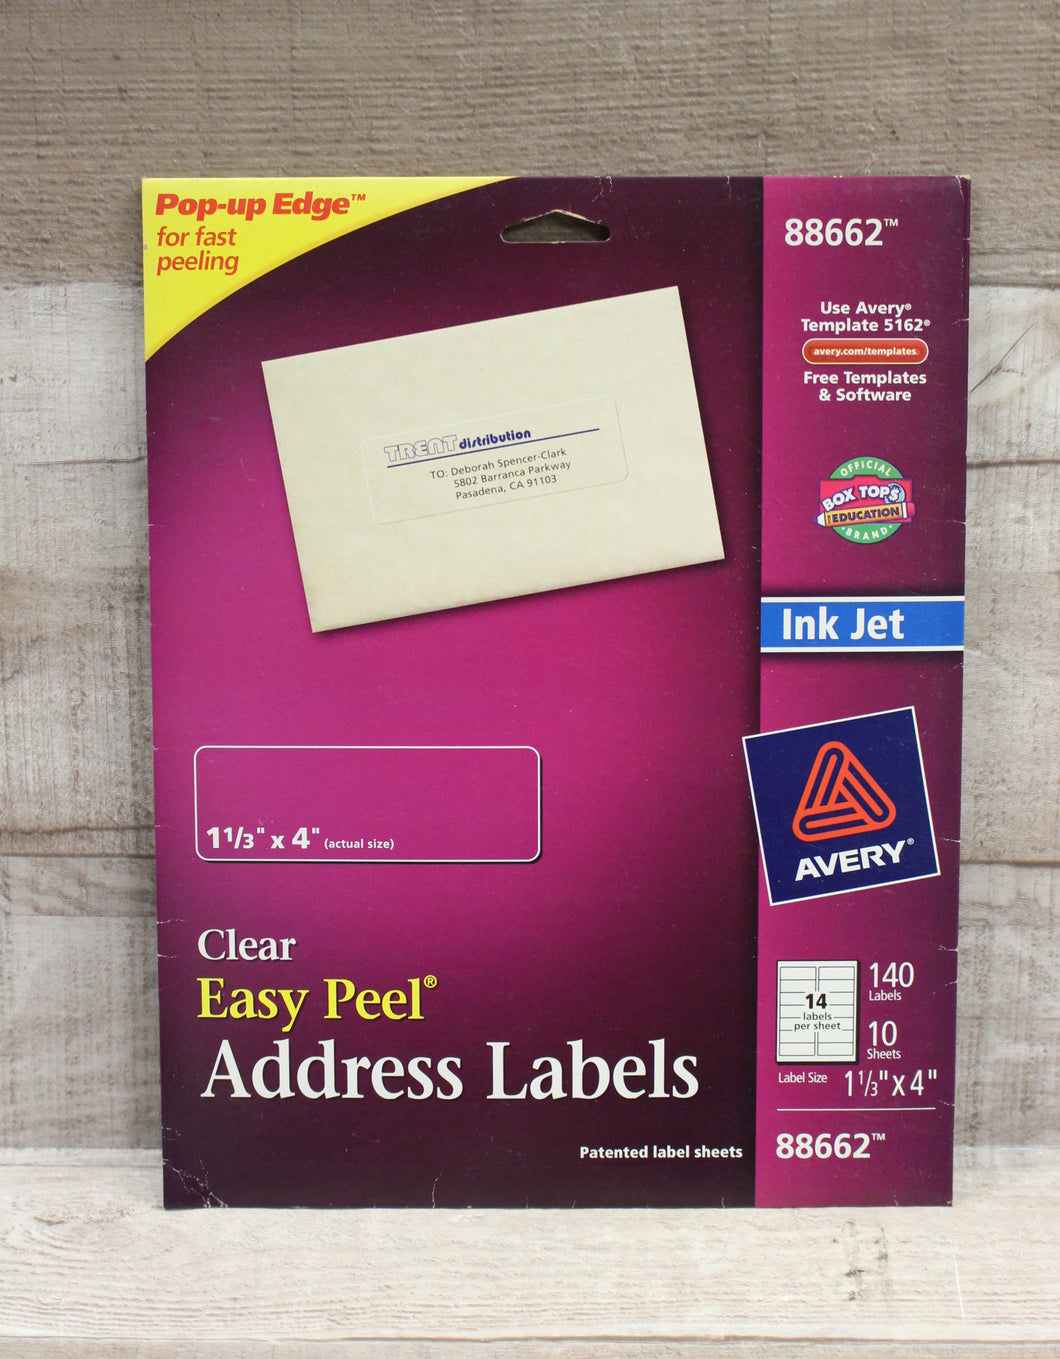 Avery Clear Address Labels - 88662 - 1 1/3